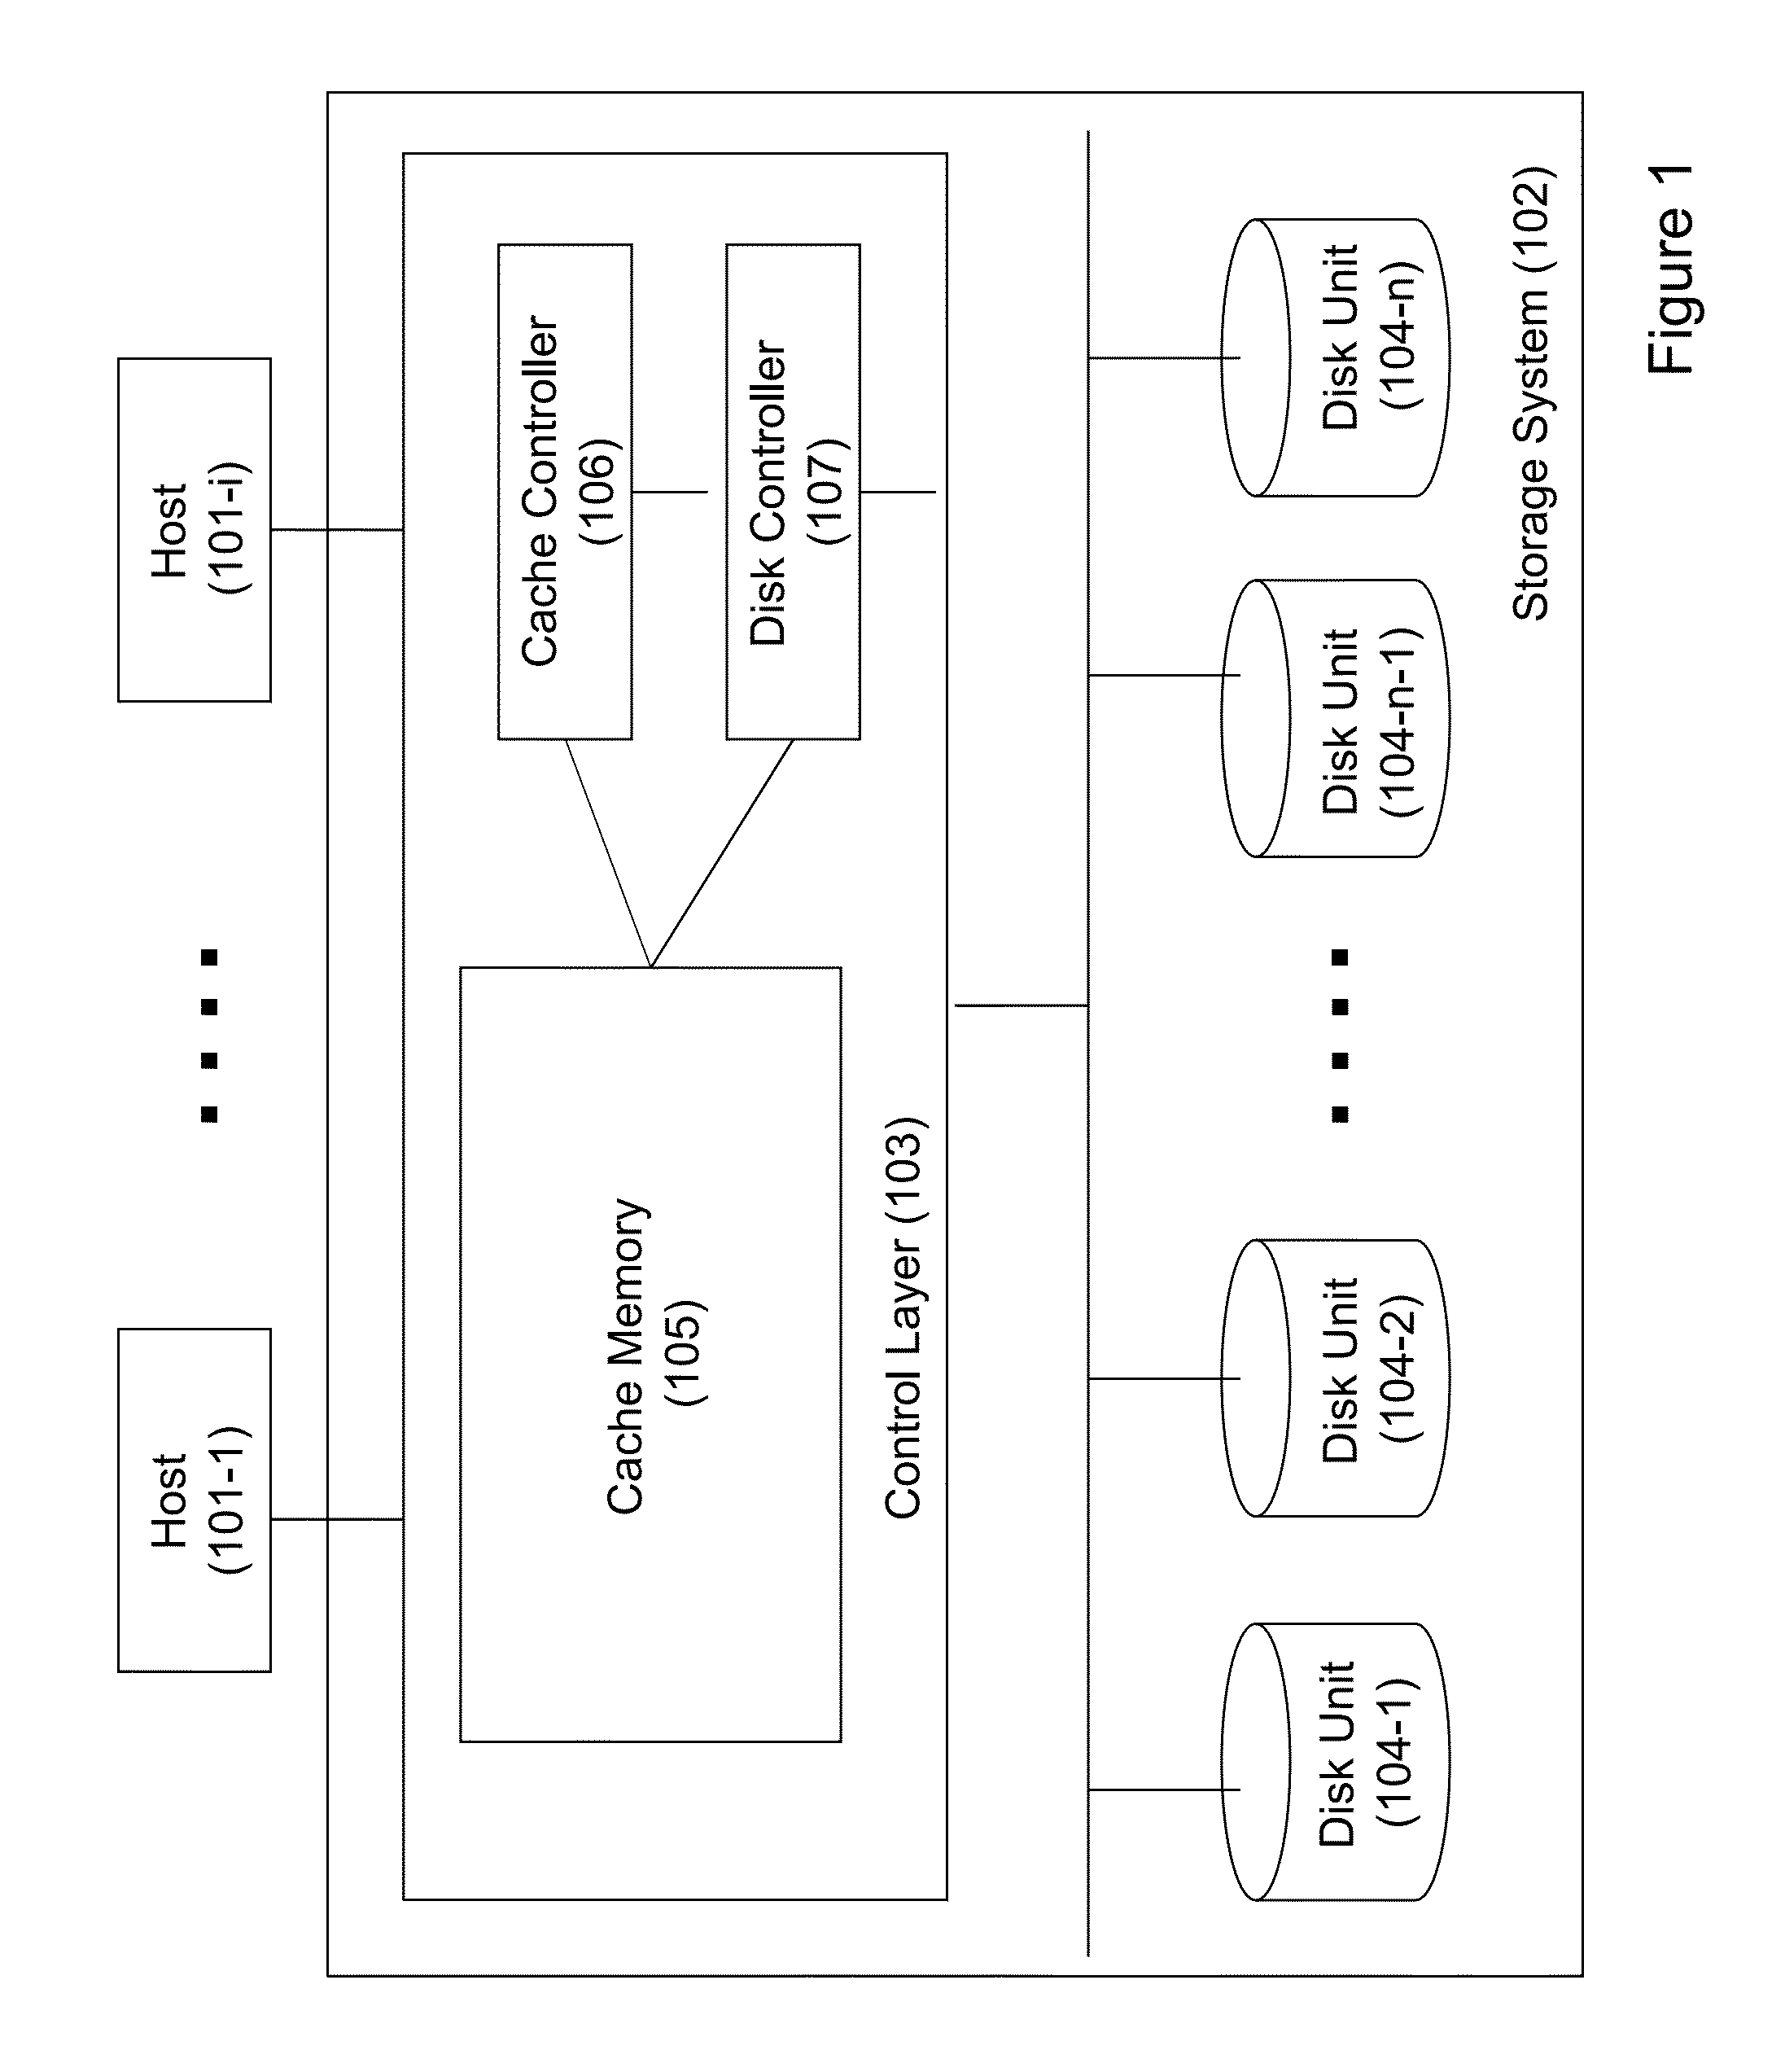 Concurrent access to a single disk track by combining reads and writes to a disk with a mask